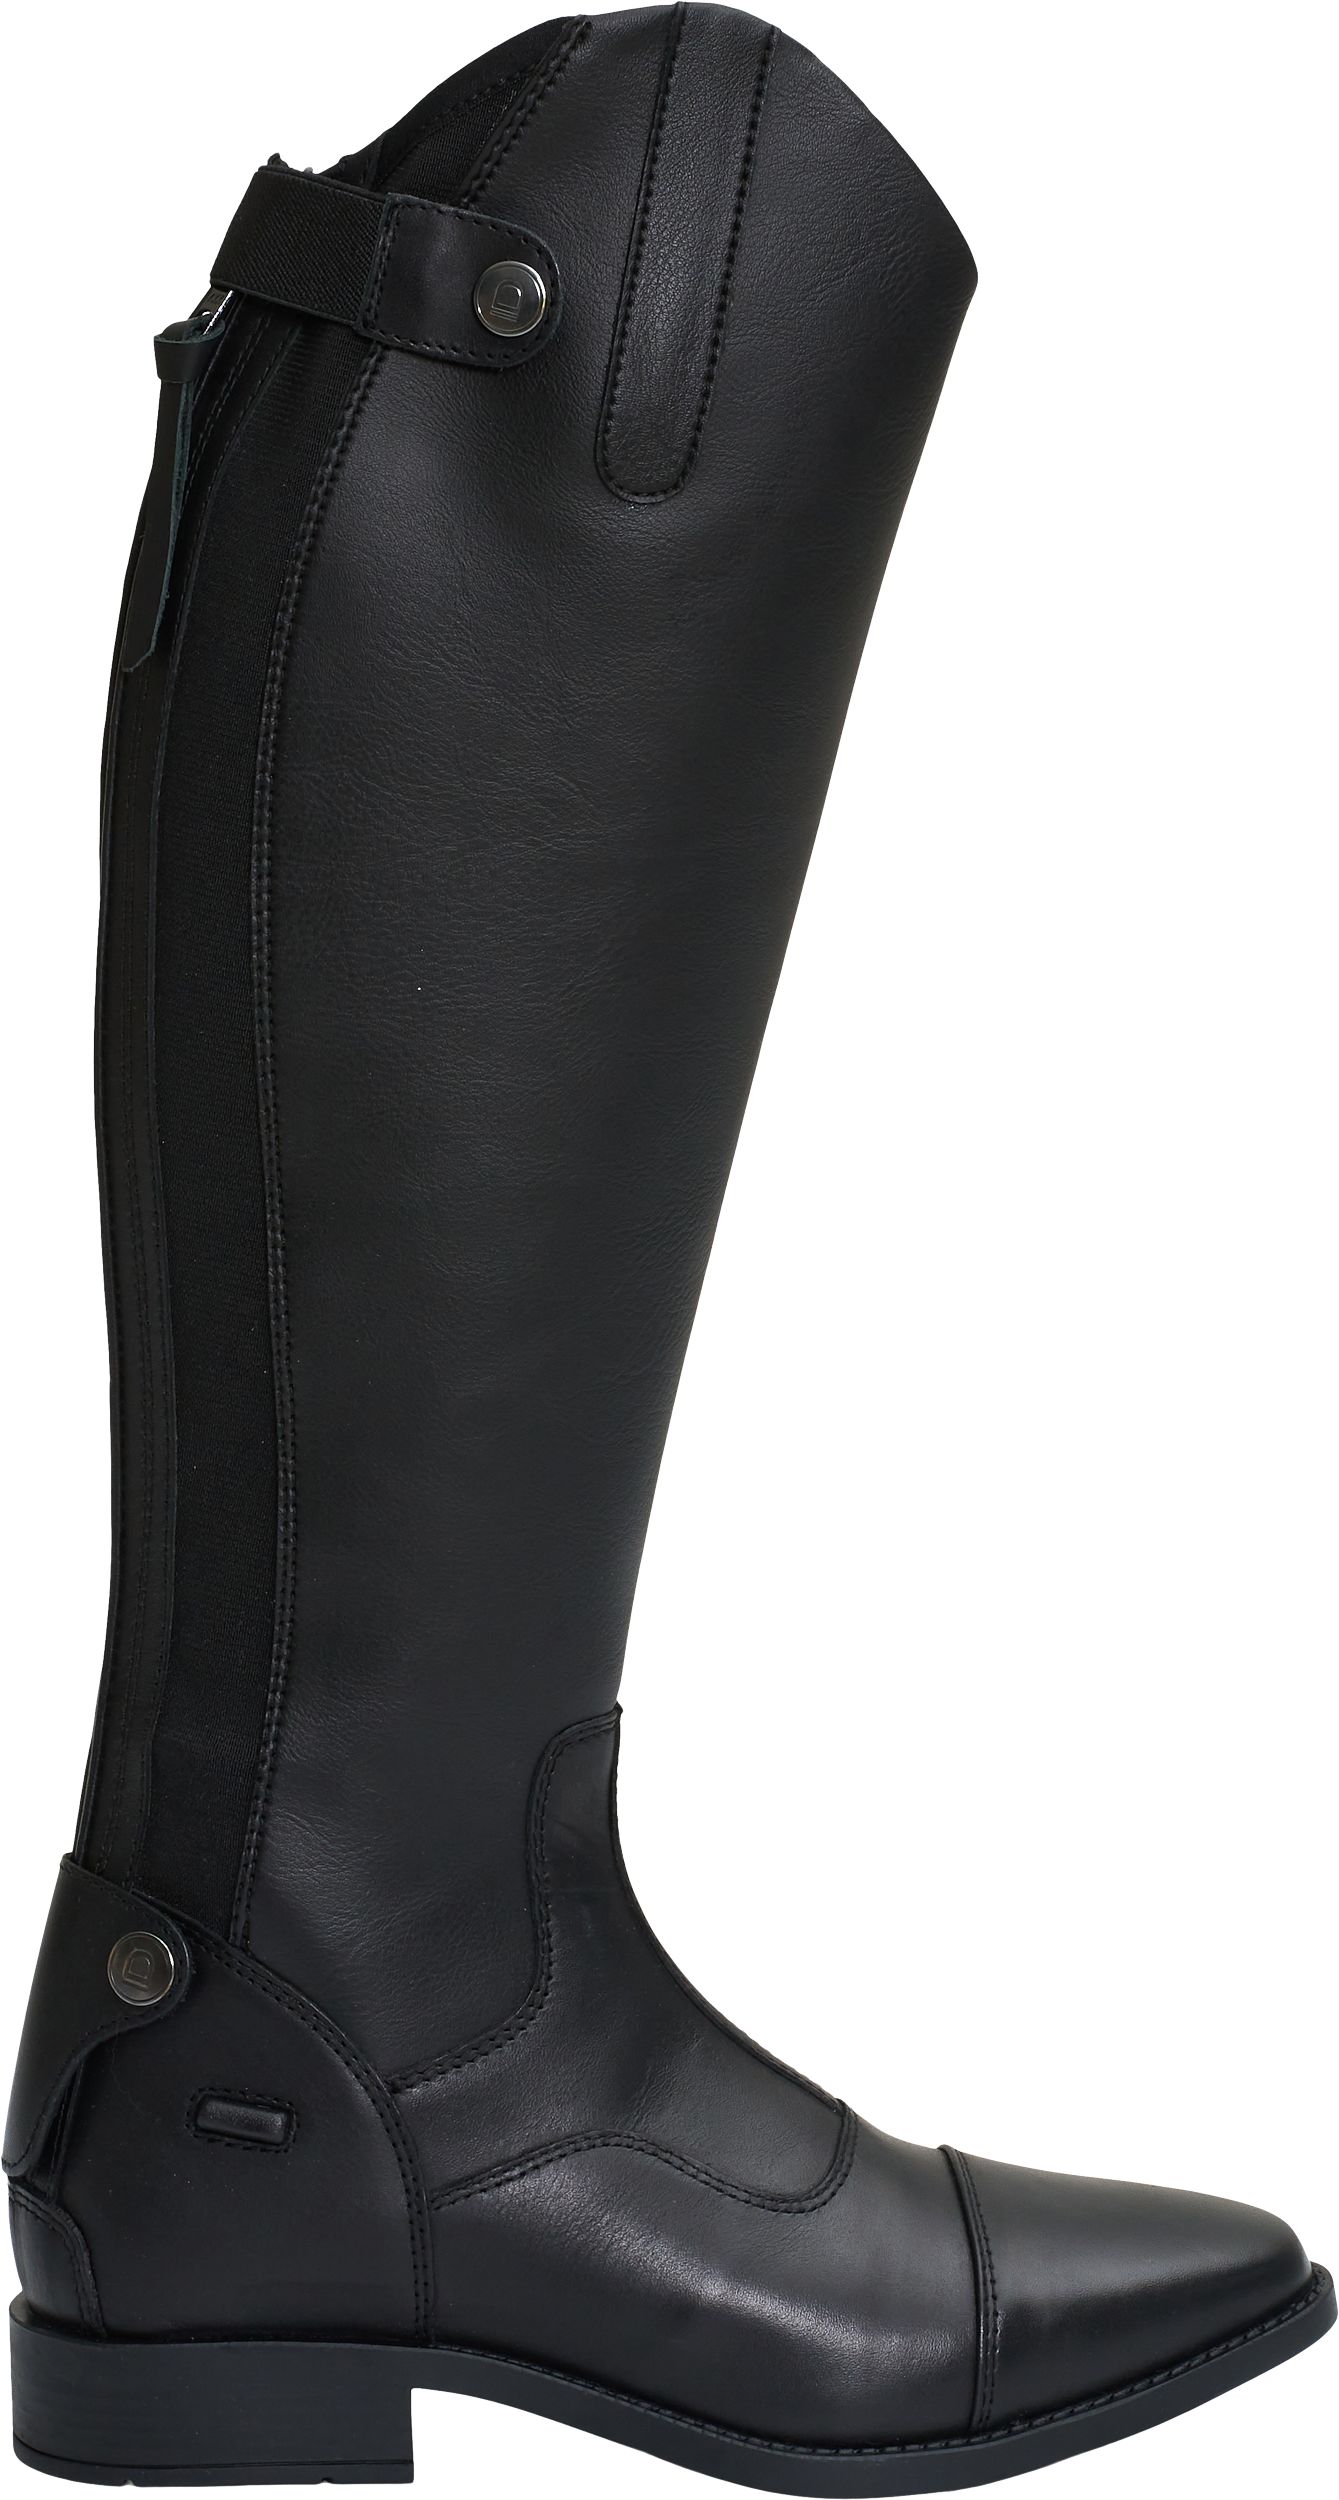 EQUIPAGE, AVERY RIDING BOOTS SR